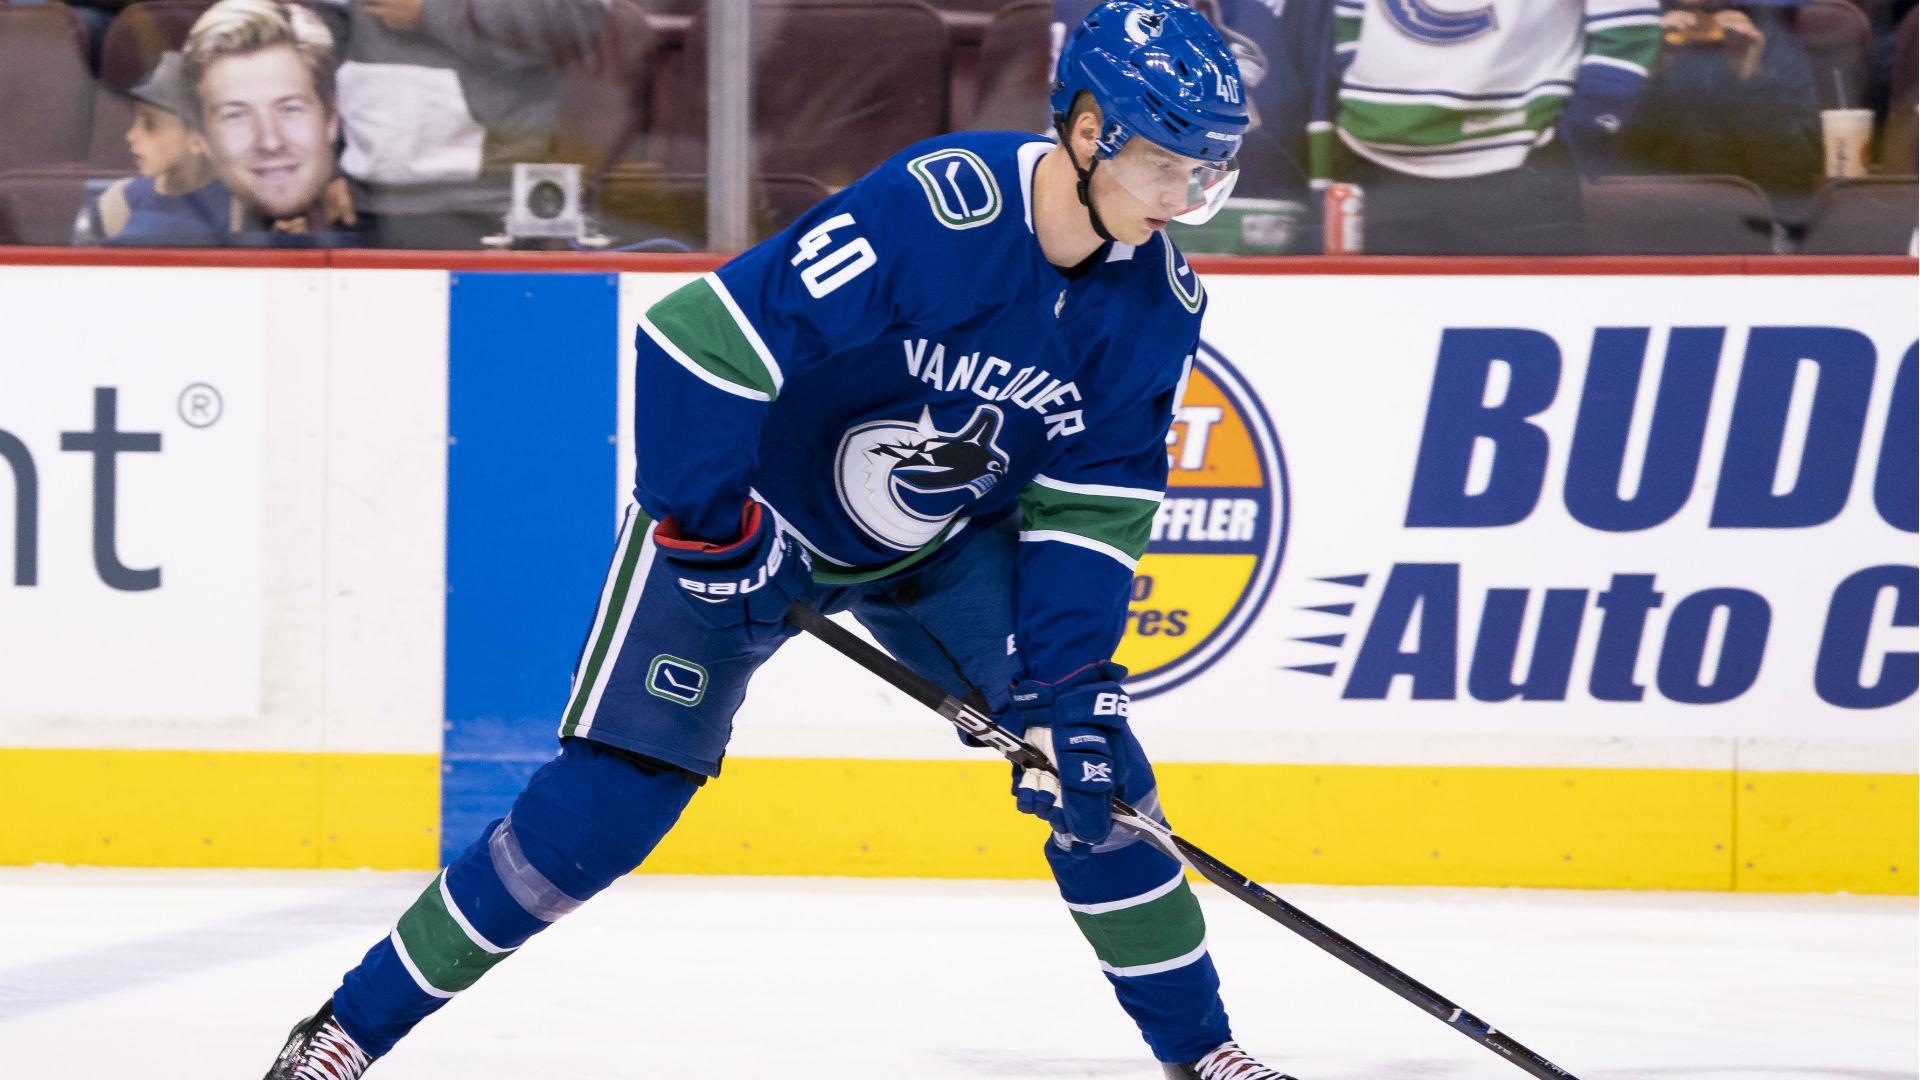 Canucks rookie Elias Pettersson scores on return from knee